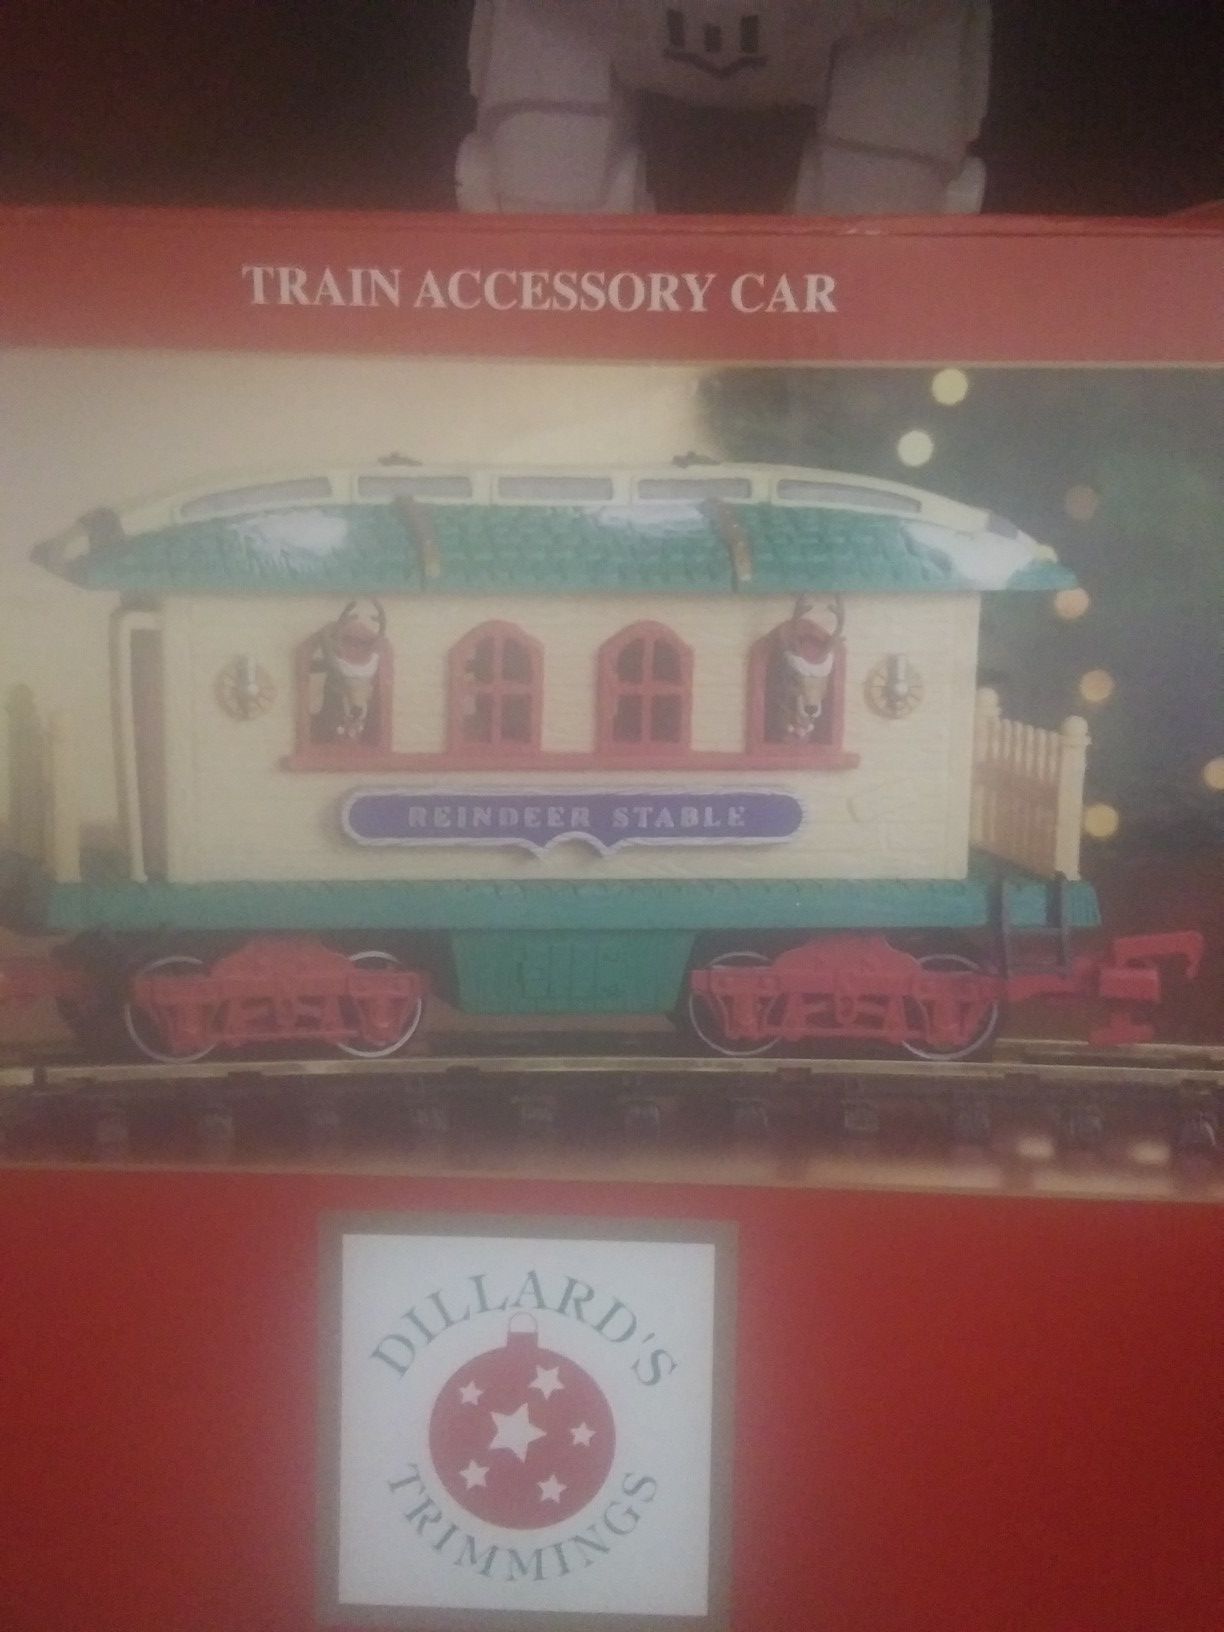 3 train accessory cars for Christmas